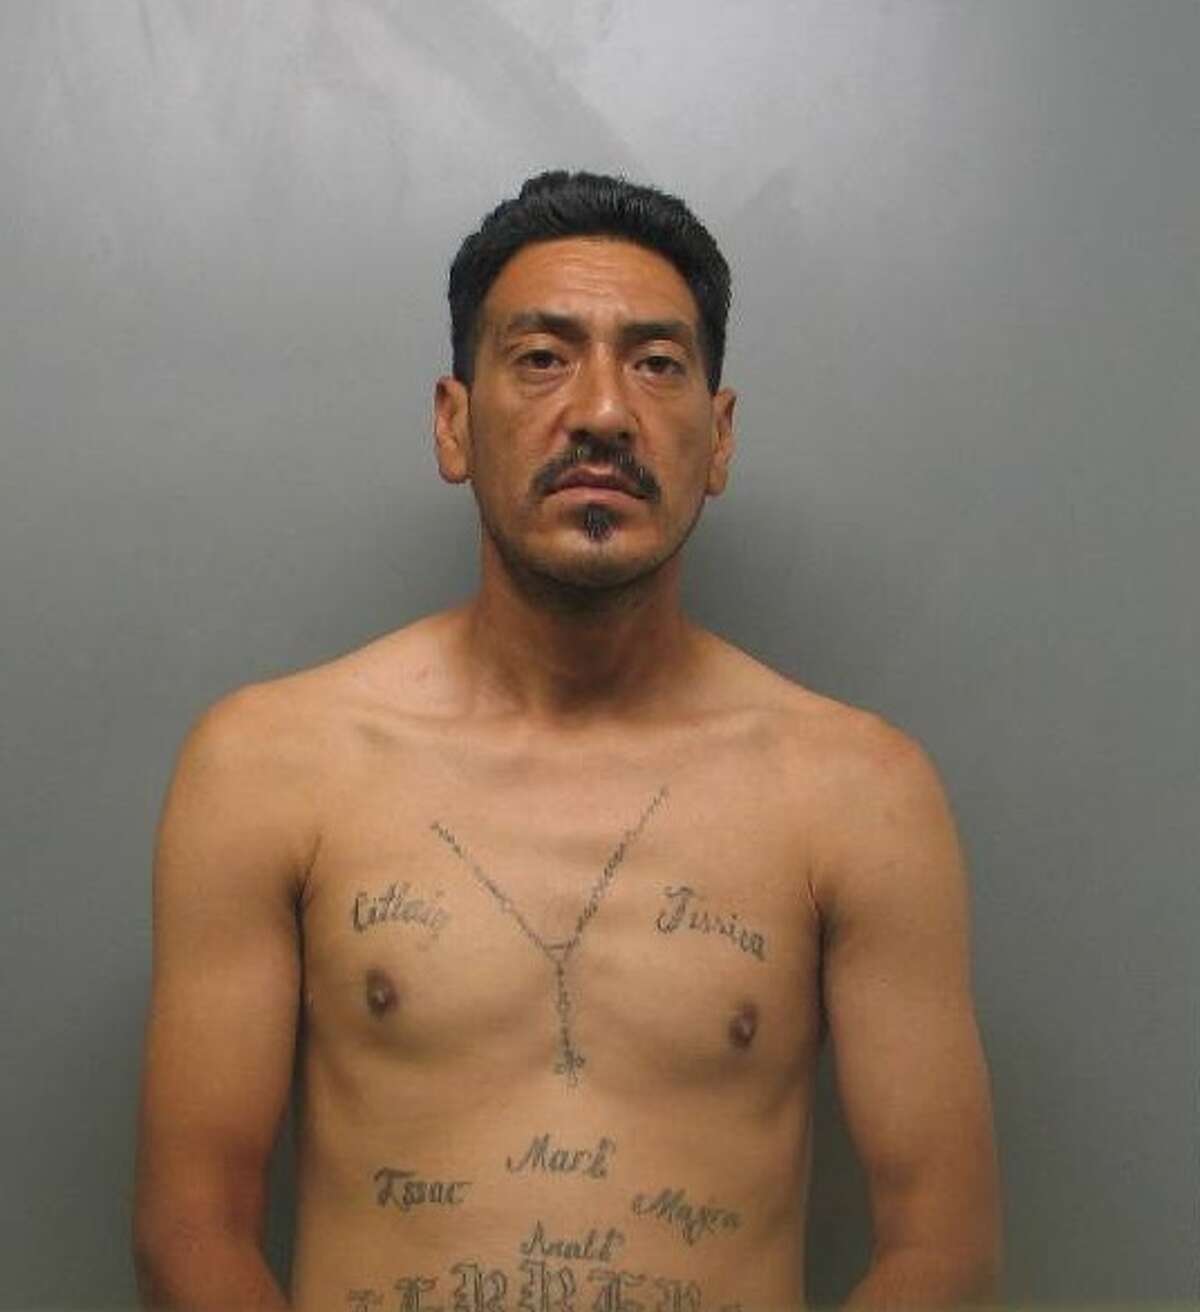 Alfonso Herrera, 42, was charged with assault family violence, theft from a Person, fail to identify by giving false or fictitious information, evading arrest and aggravated assault with a deadly weapon, family violence.